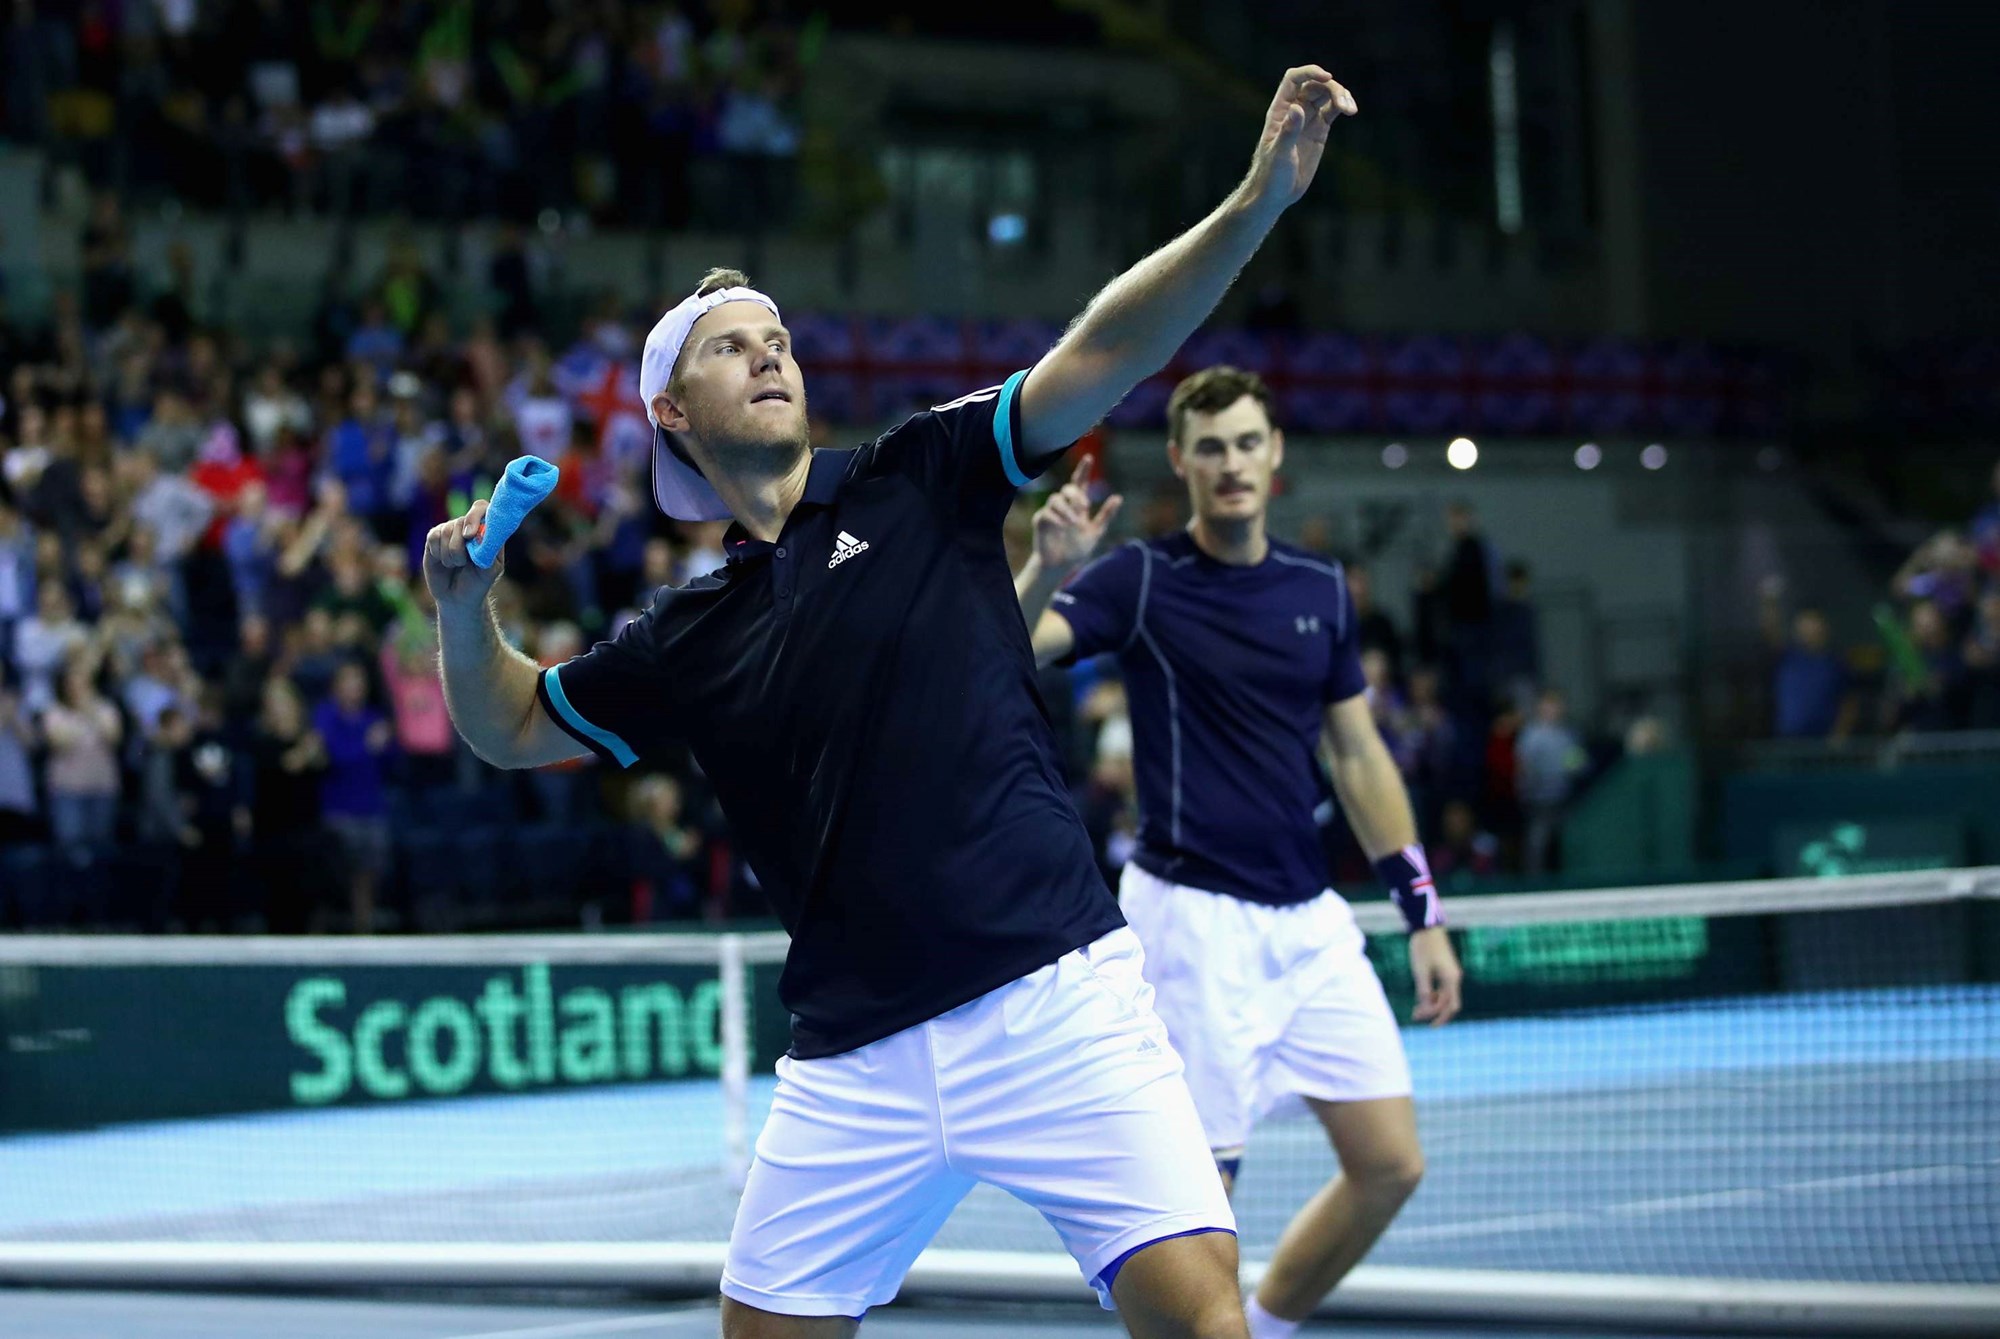 Dom Inglot celebrates a Davis Cup win in Glasgow by throwing his wristband into the crowd